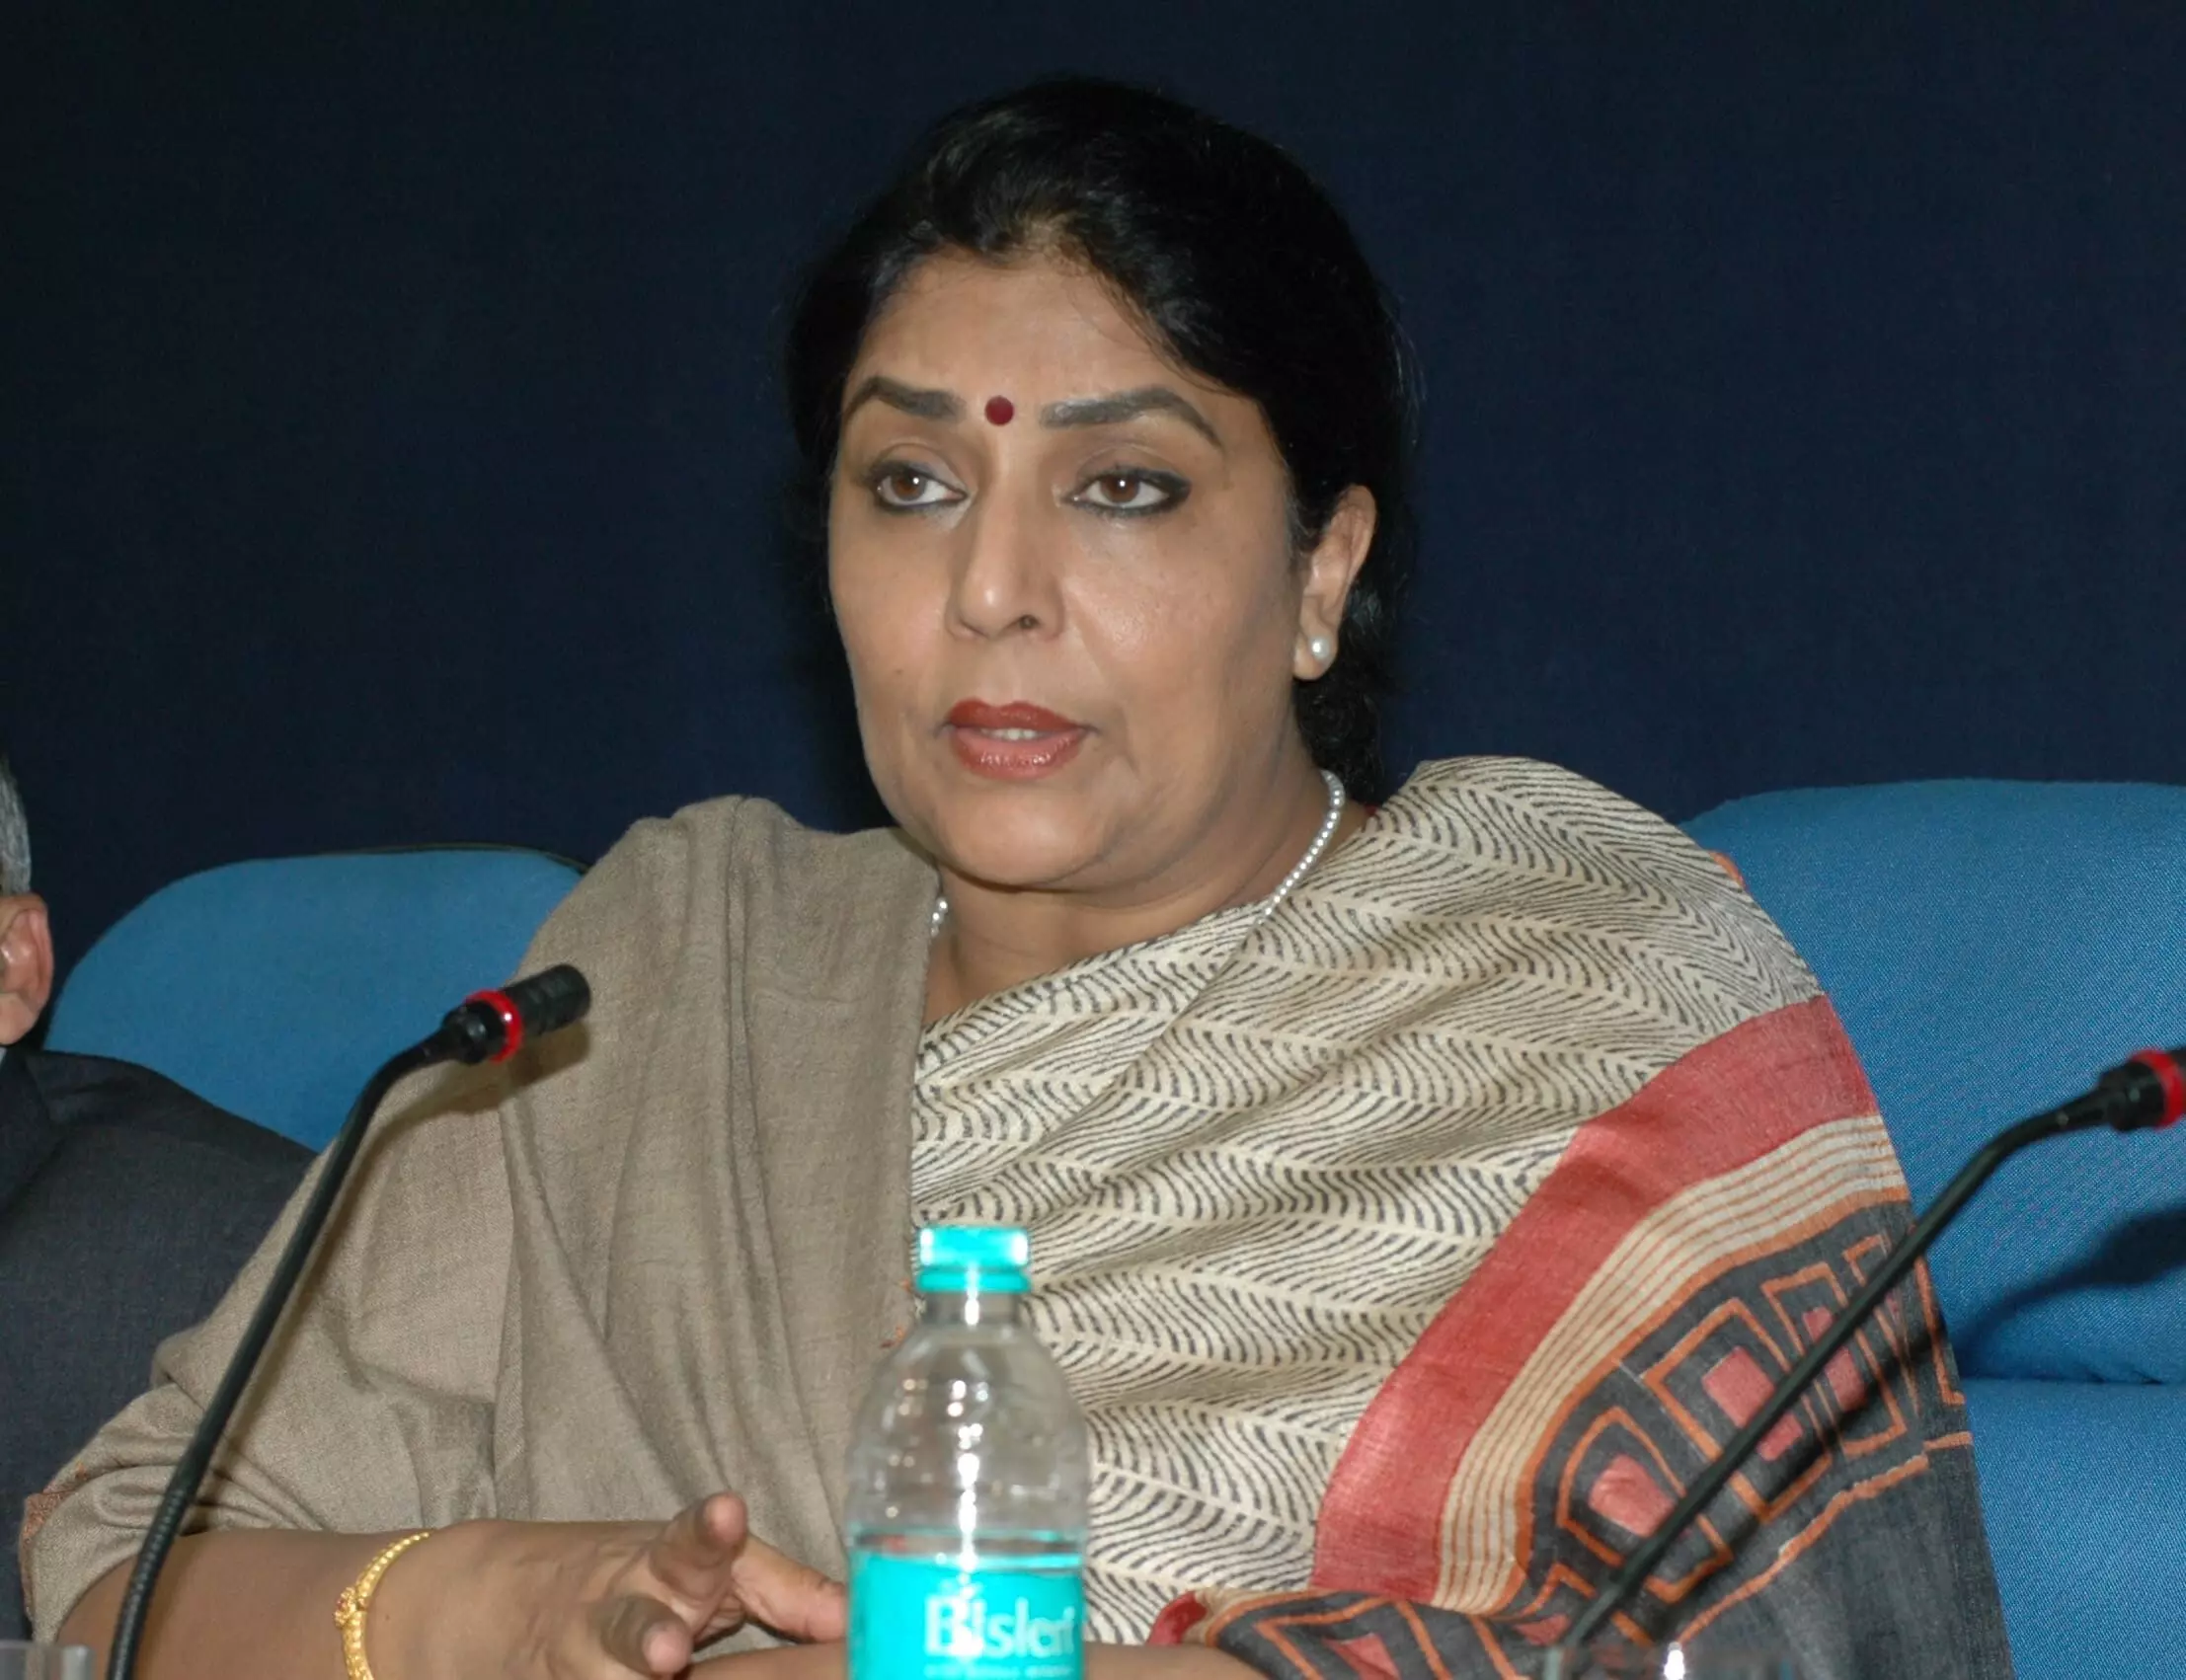 Merger between Cong and YSRTP will negatively impact Cong: Renuka Chowdhury